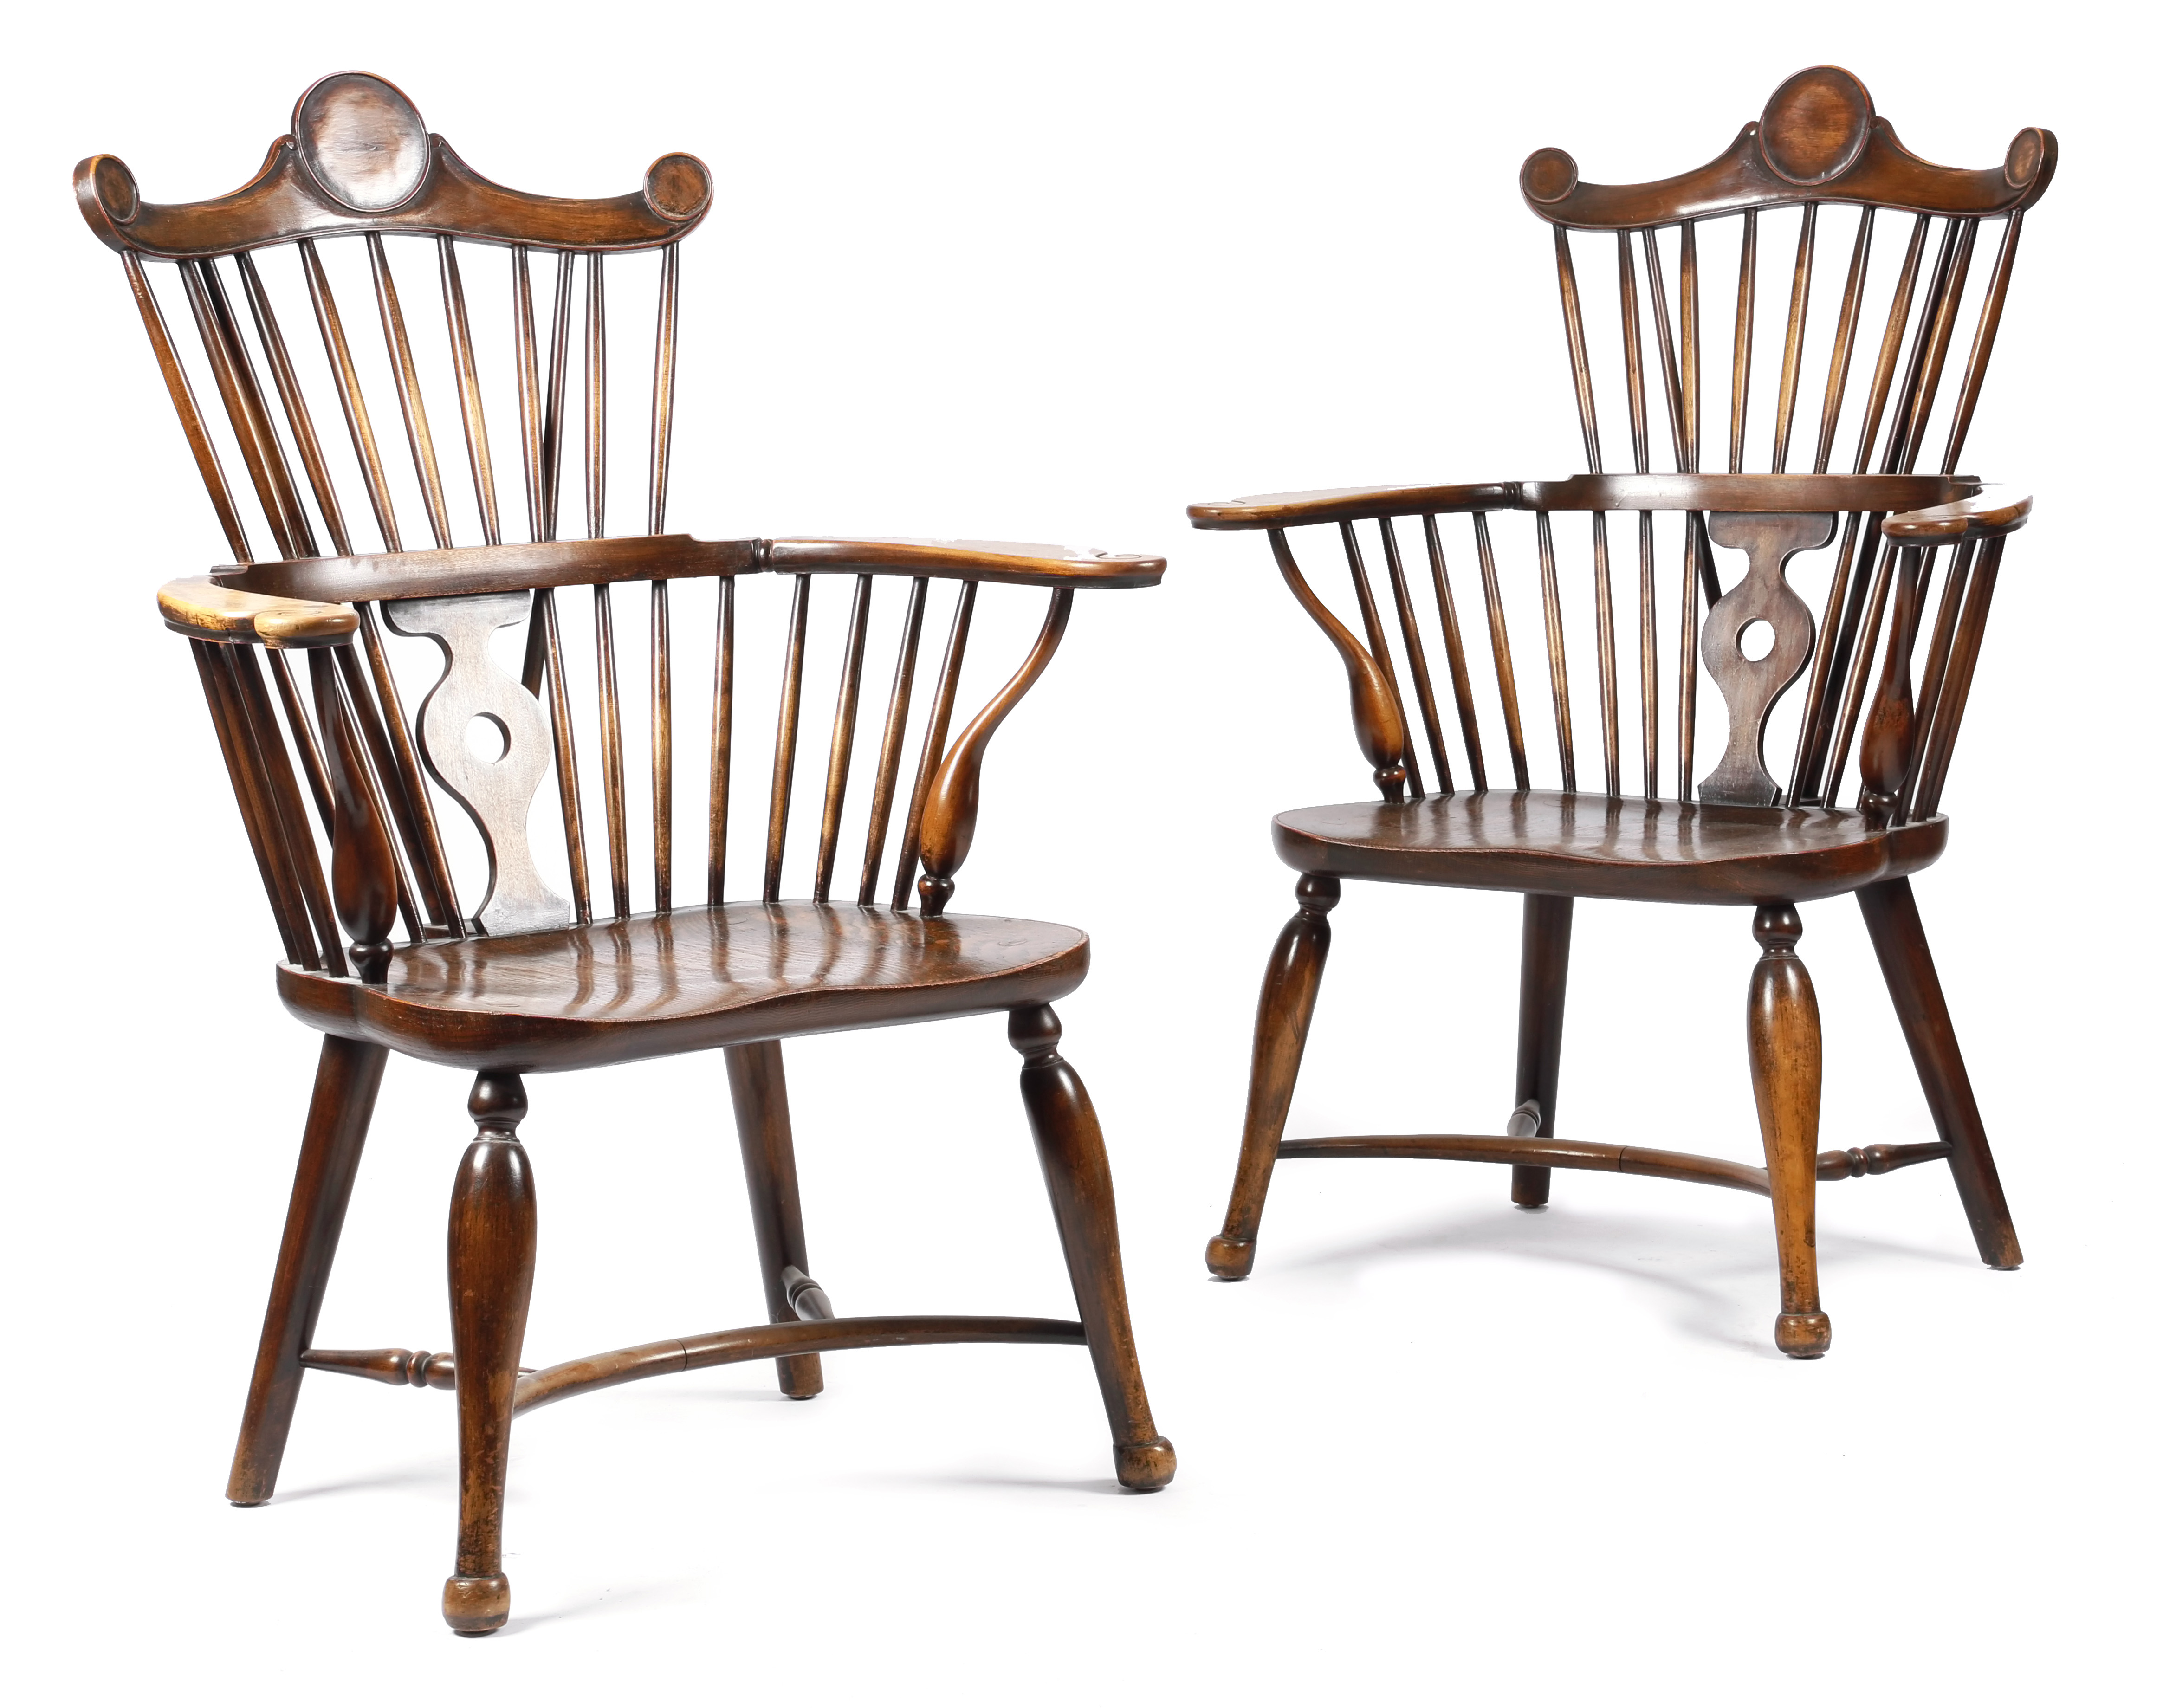 A PAIR OF ARTS AND CRAFTS BEECH AND ELM WINDSOR STYLE ARMCHAIRS LATE 19TH / EARLY 20TH CENTURY